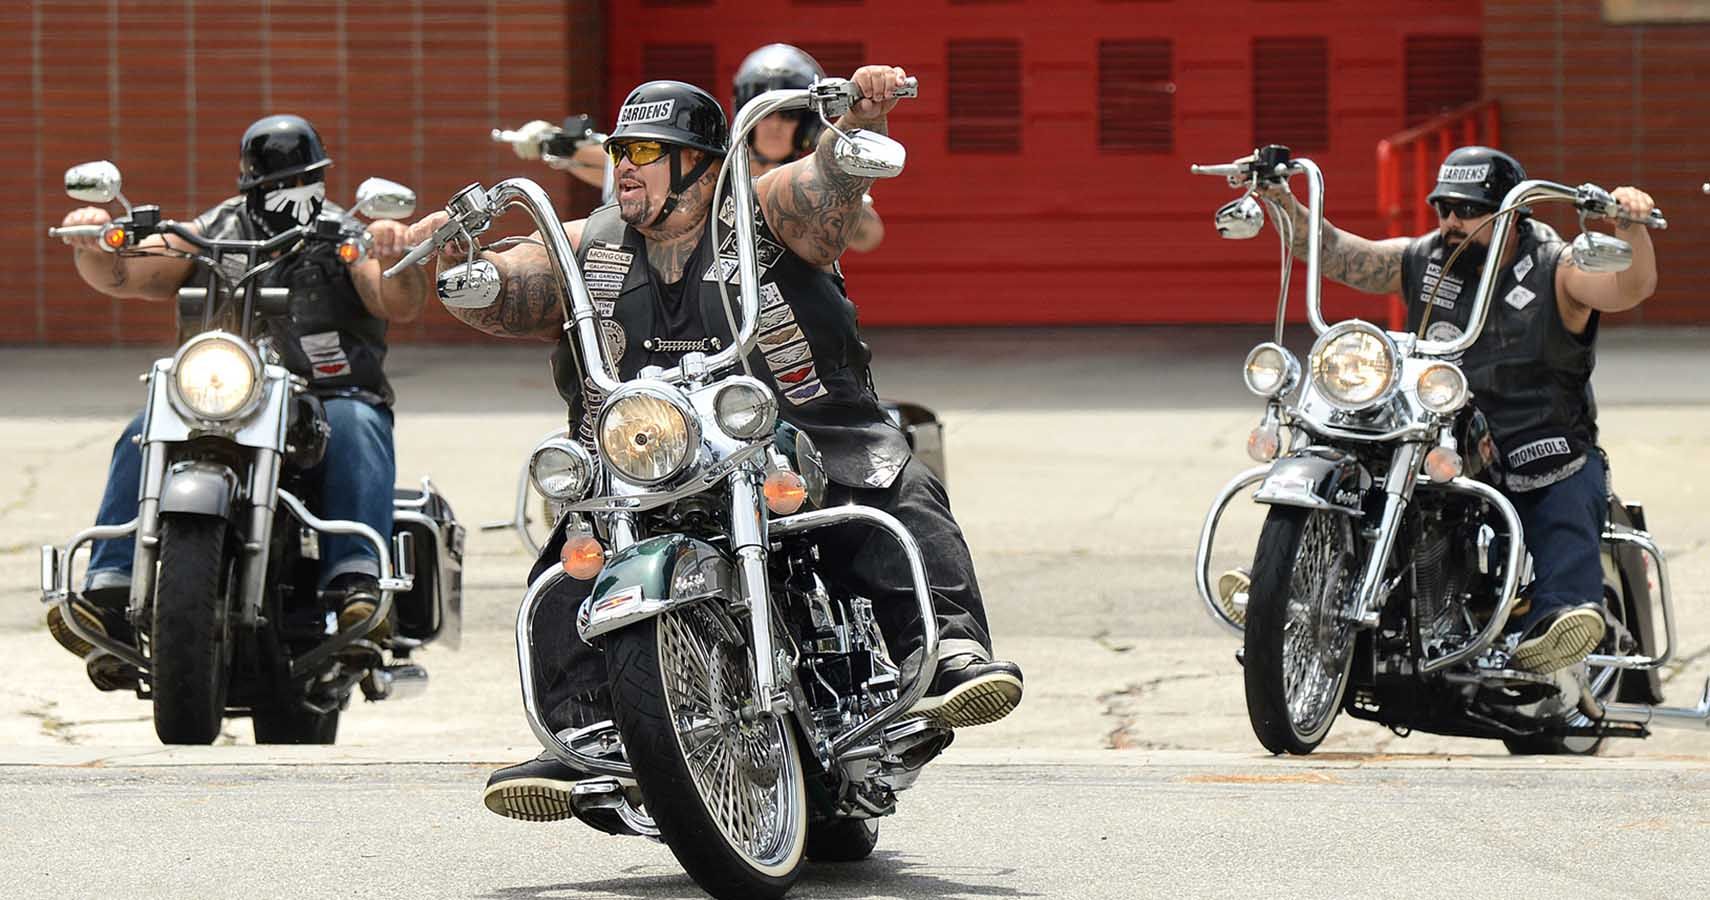 As Difficult Joining The Motorcycle Club Is, Leaving Is Equally Tough